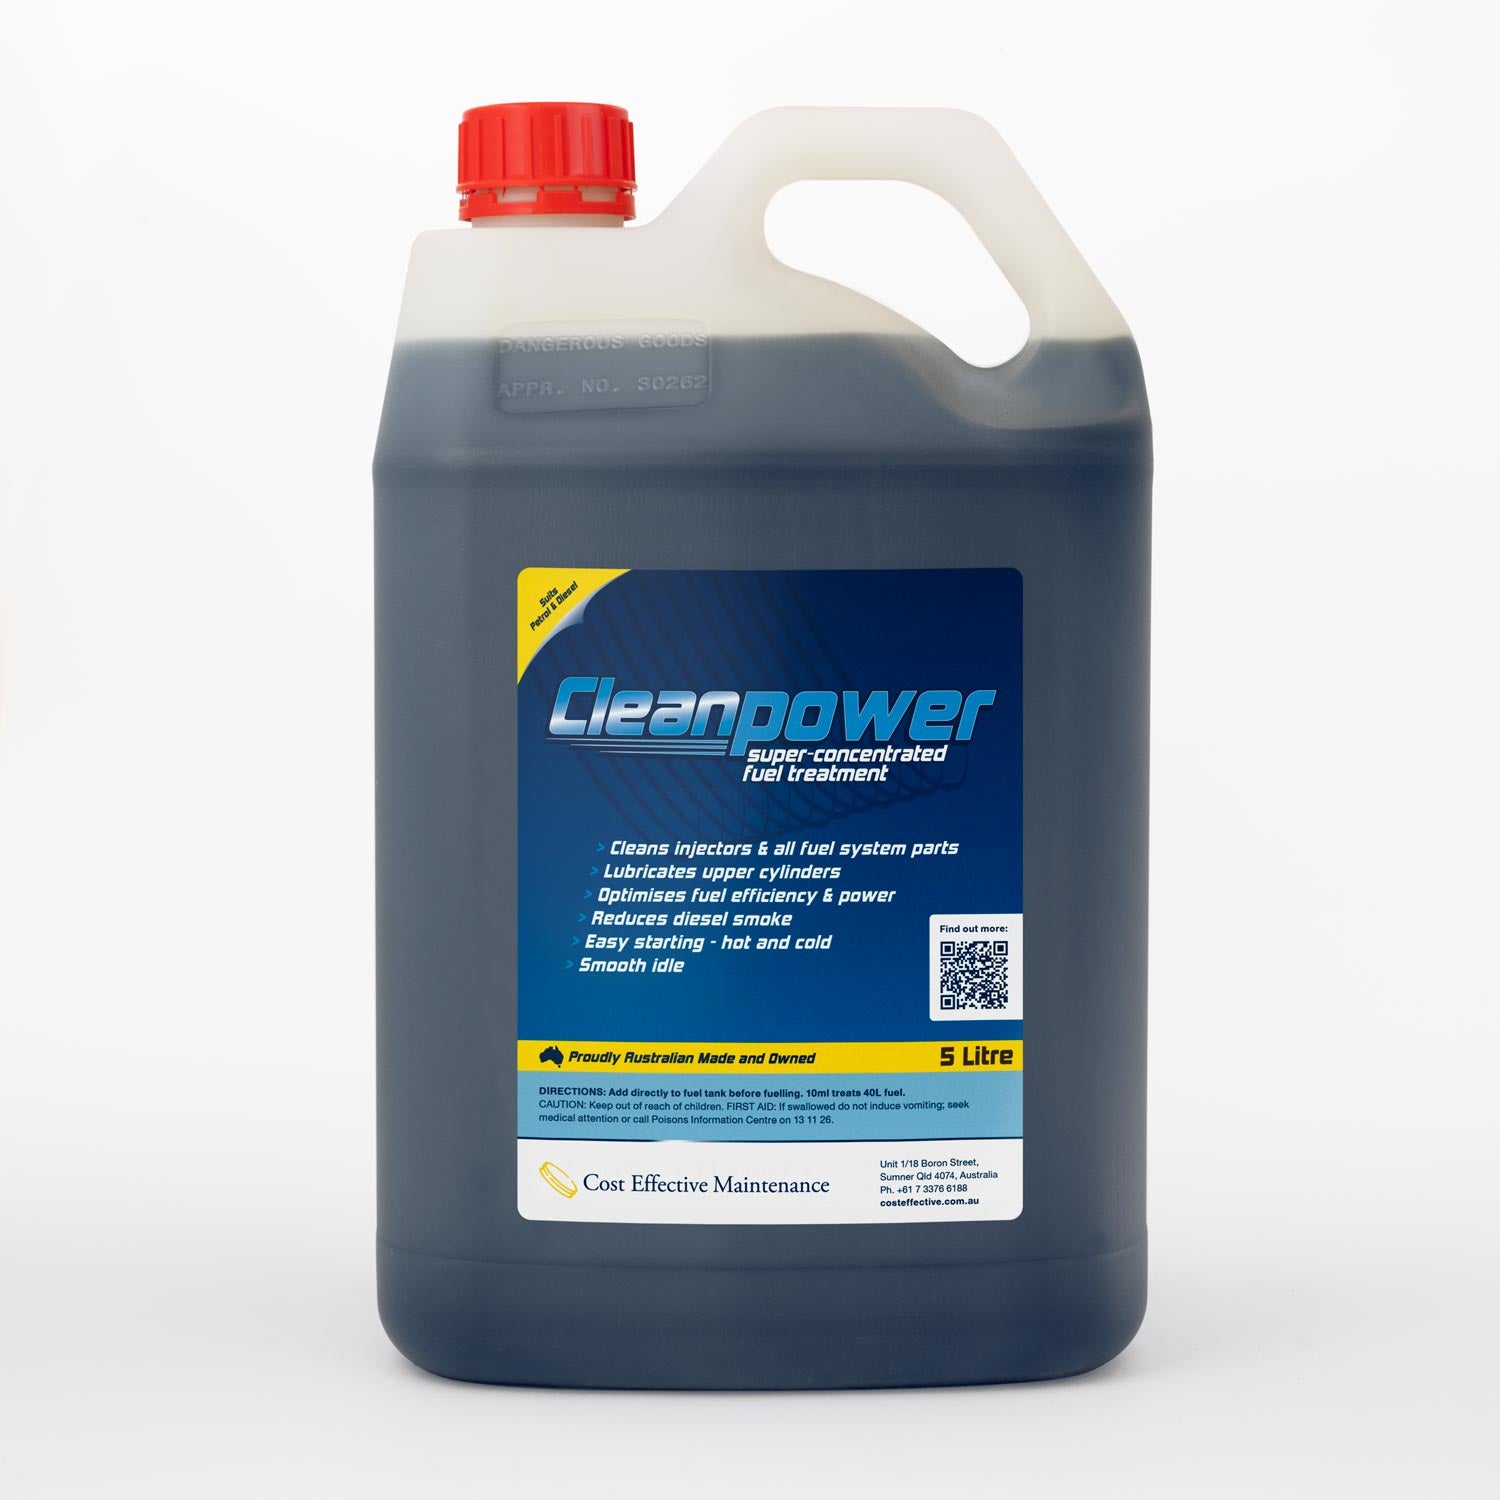 Cost Effective Maintenance Cleanpower Fuel Treatment and Fuel Injector Cleaner